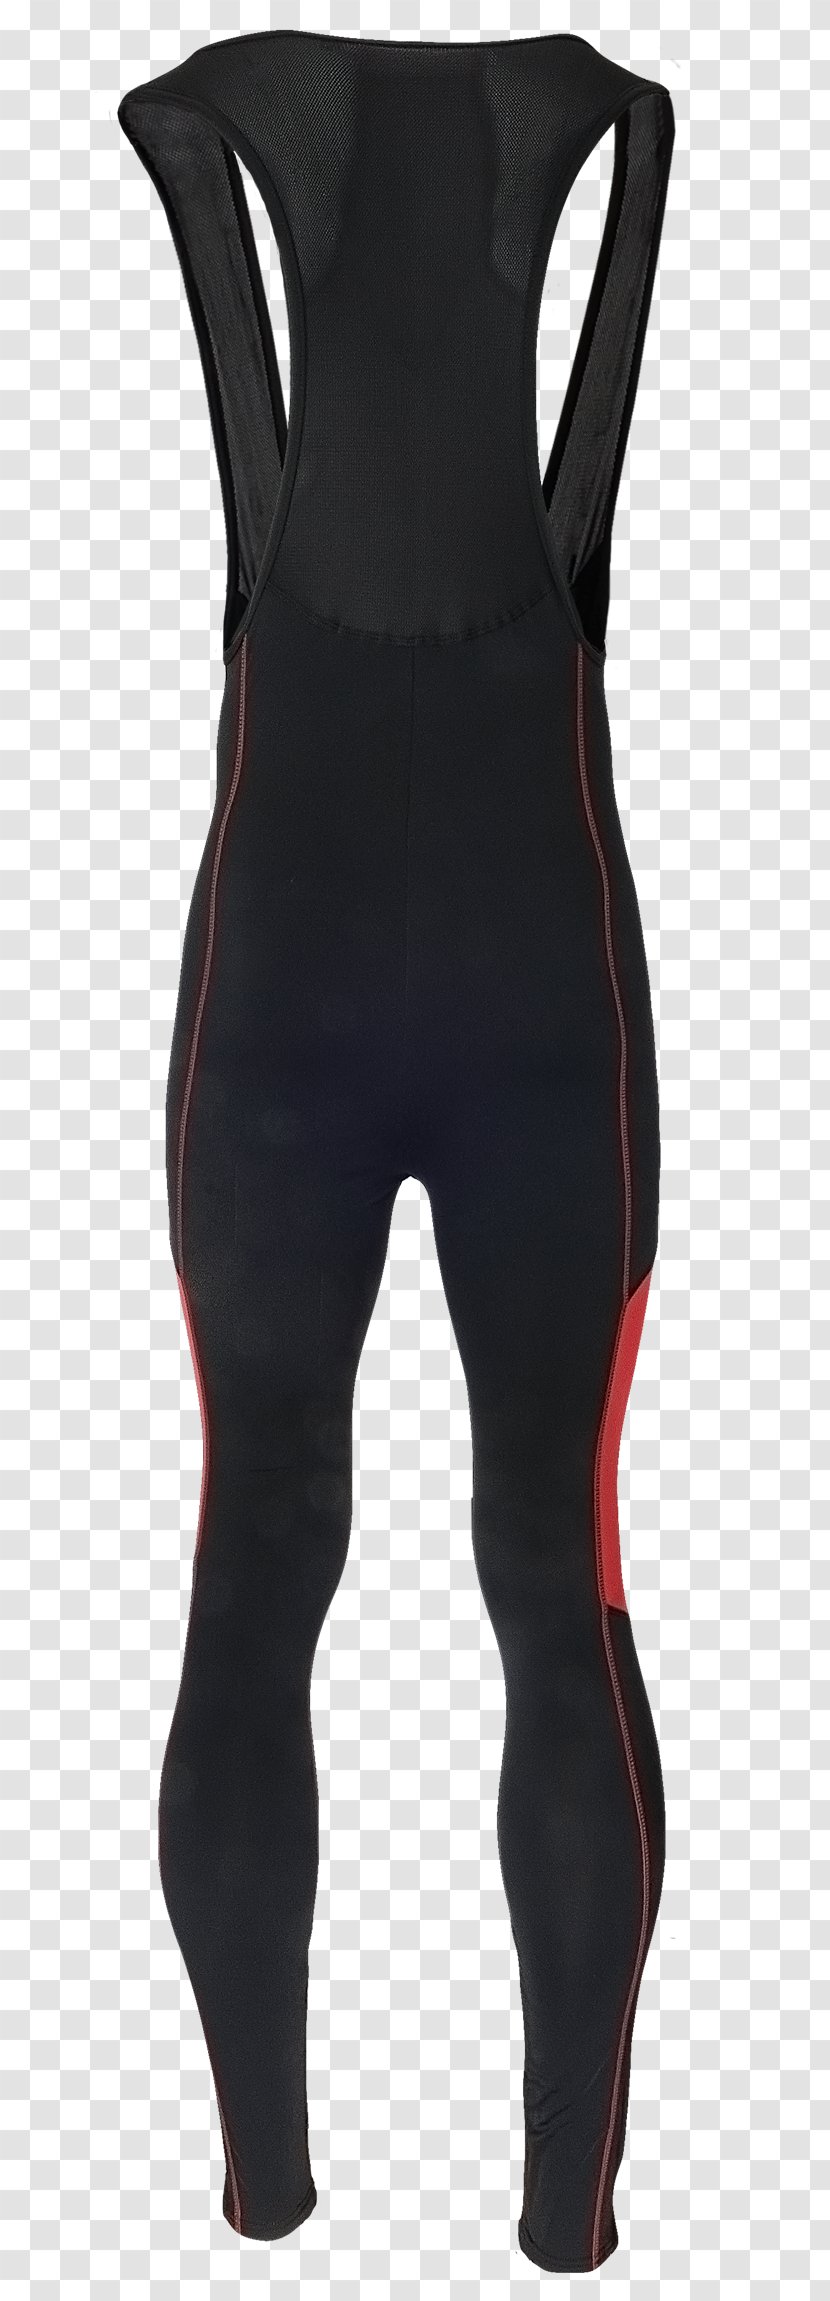 Wetsuit - Personal Protective Equipment Transparent PNG